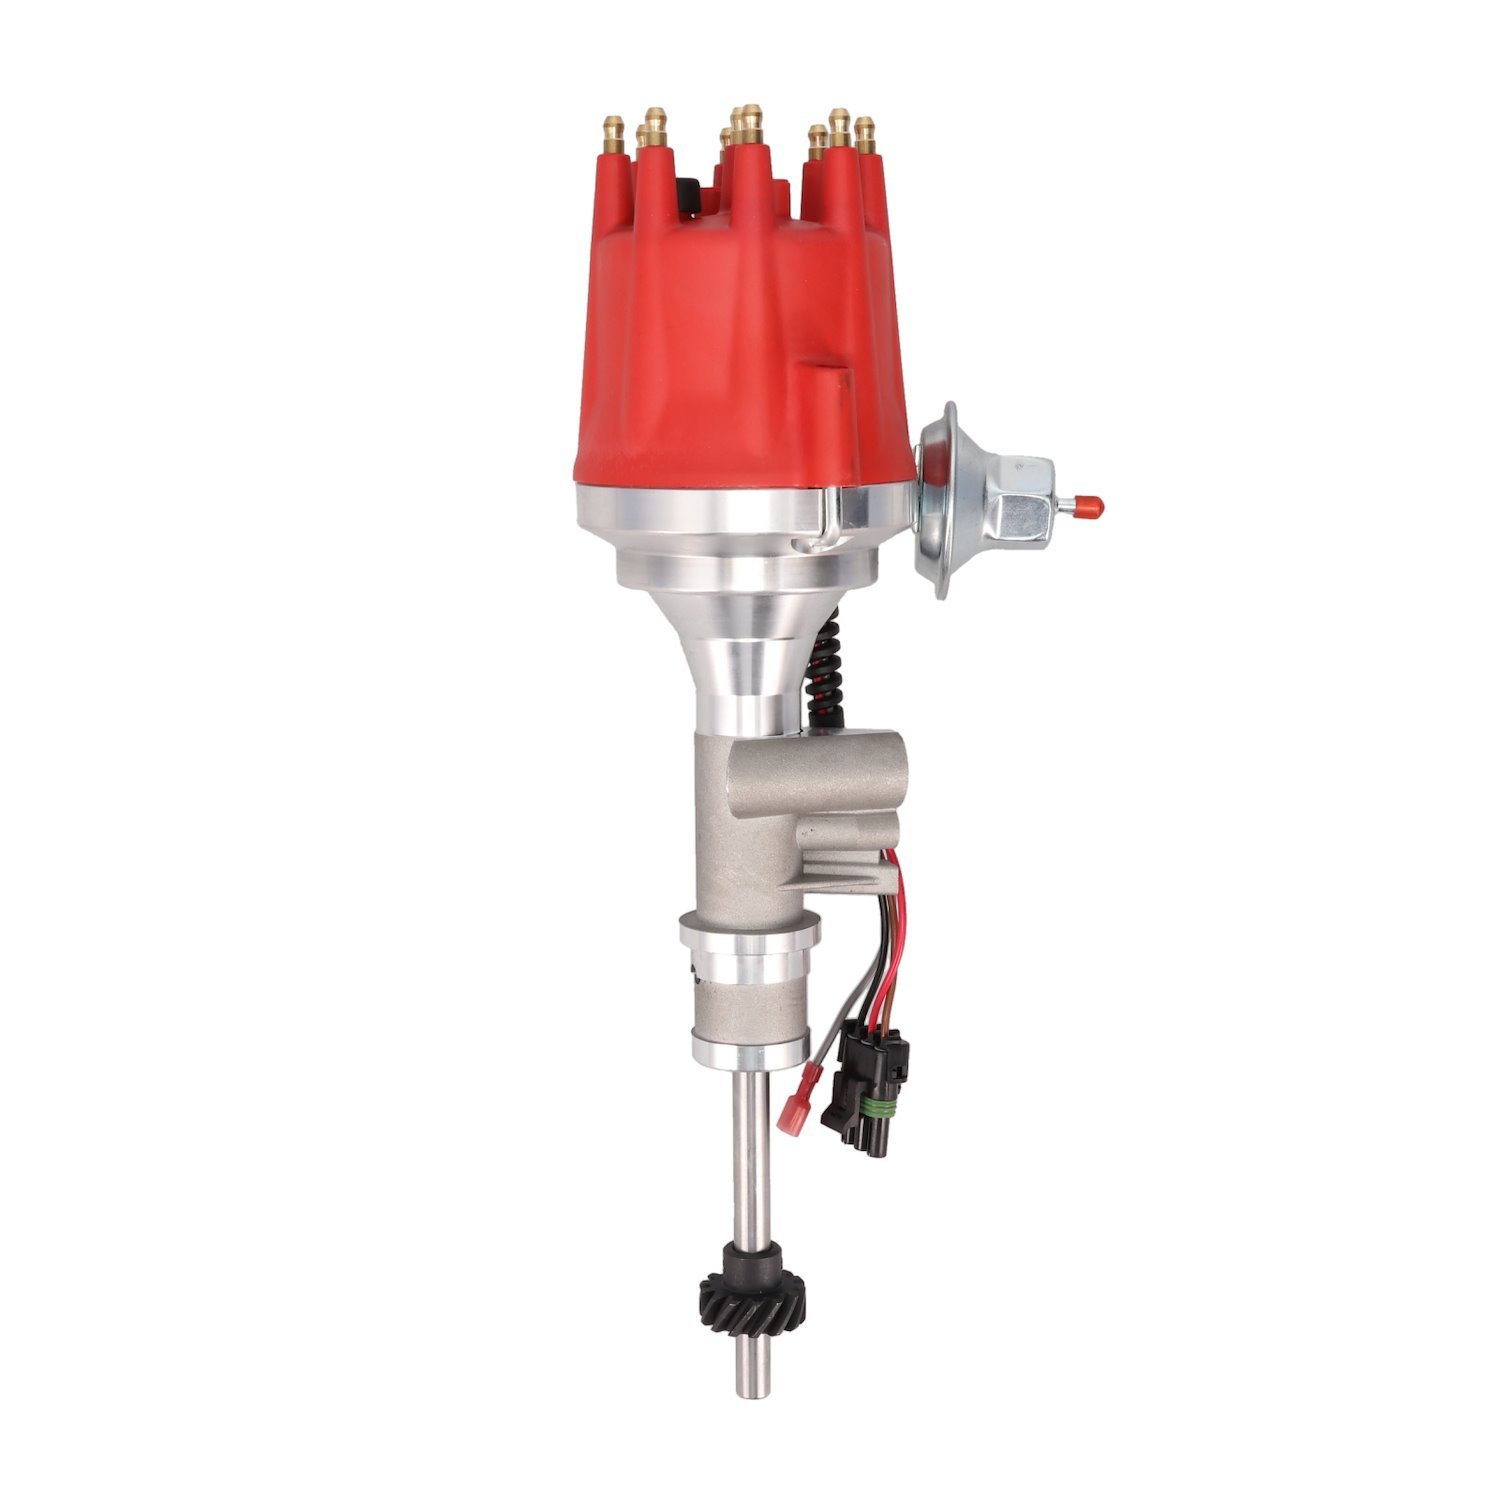 JM7741R Pro Series Ready-to-Run Distributor, Ford Y-Block Tach Drive (272-312), Red